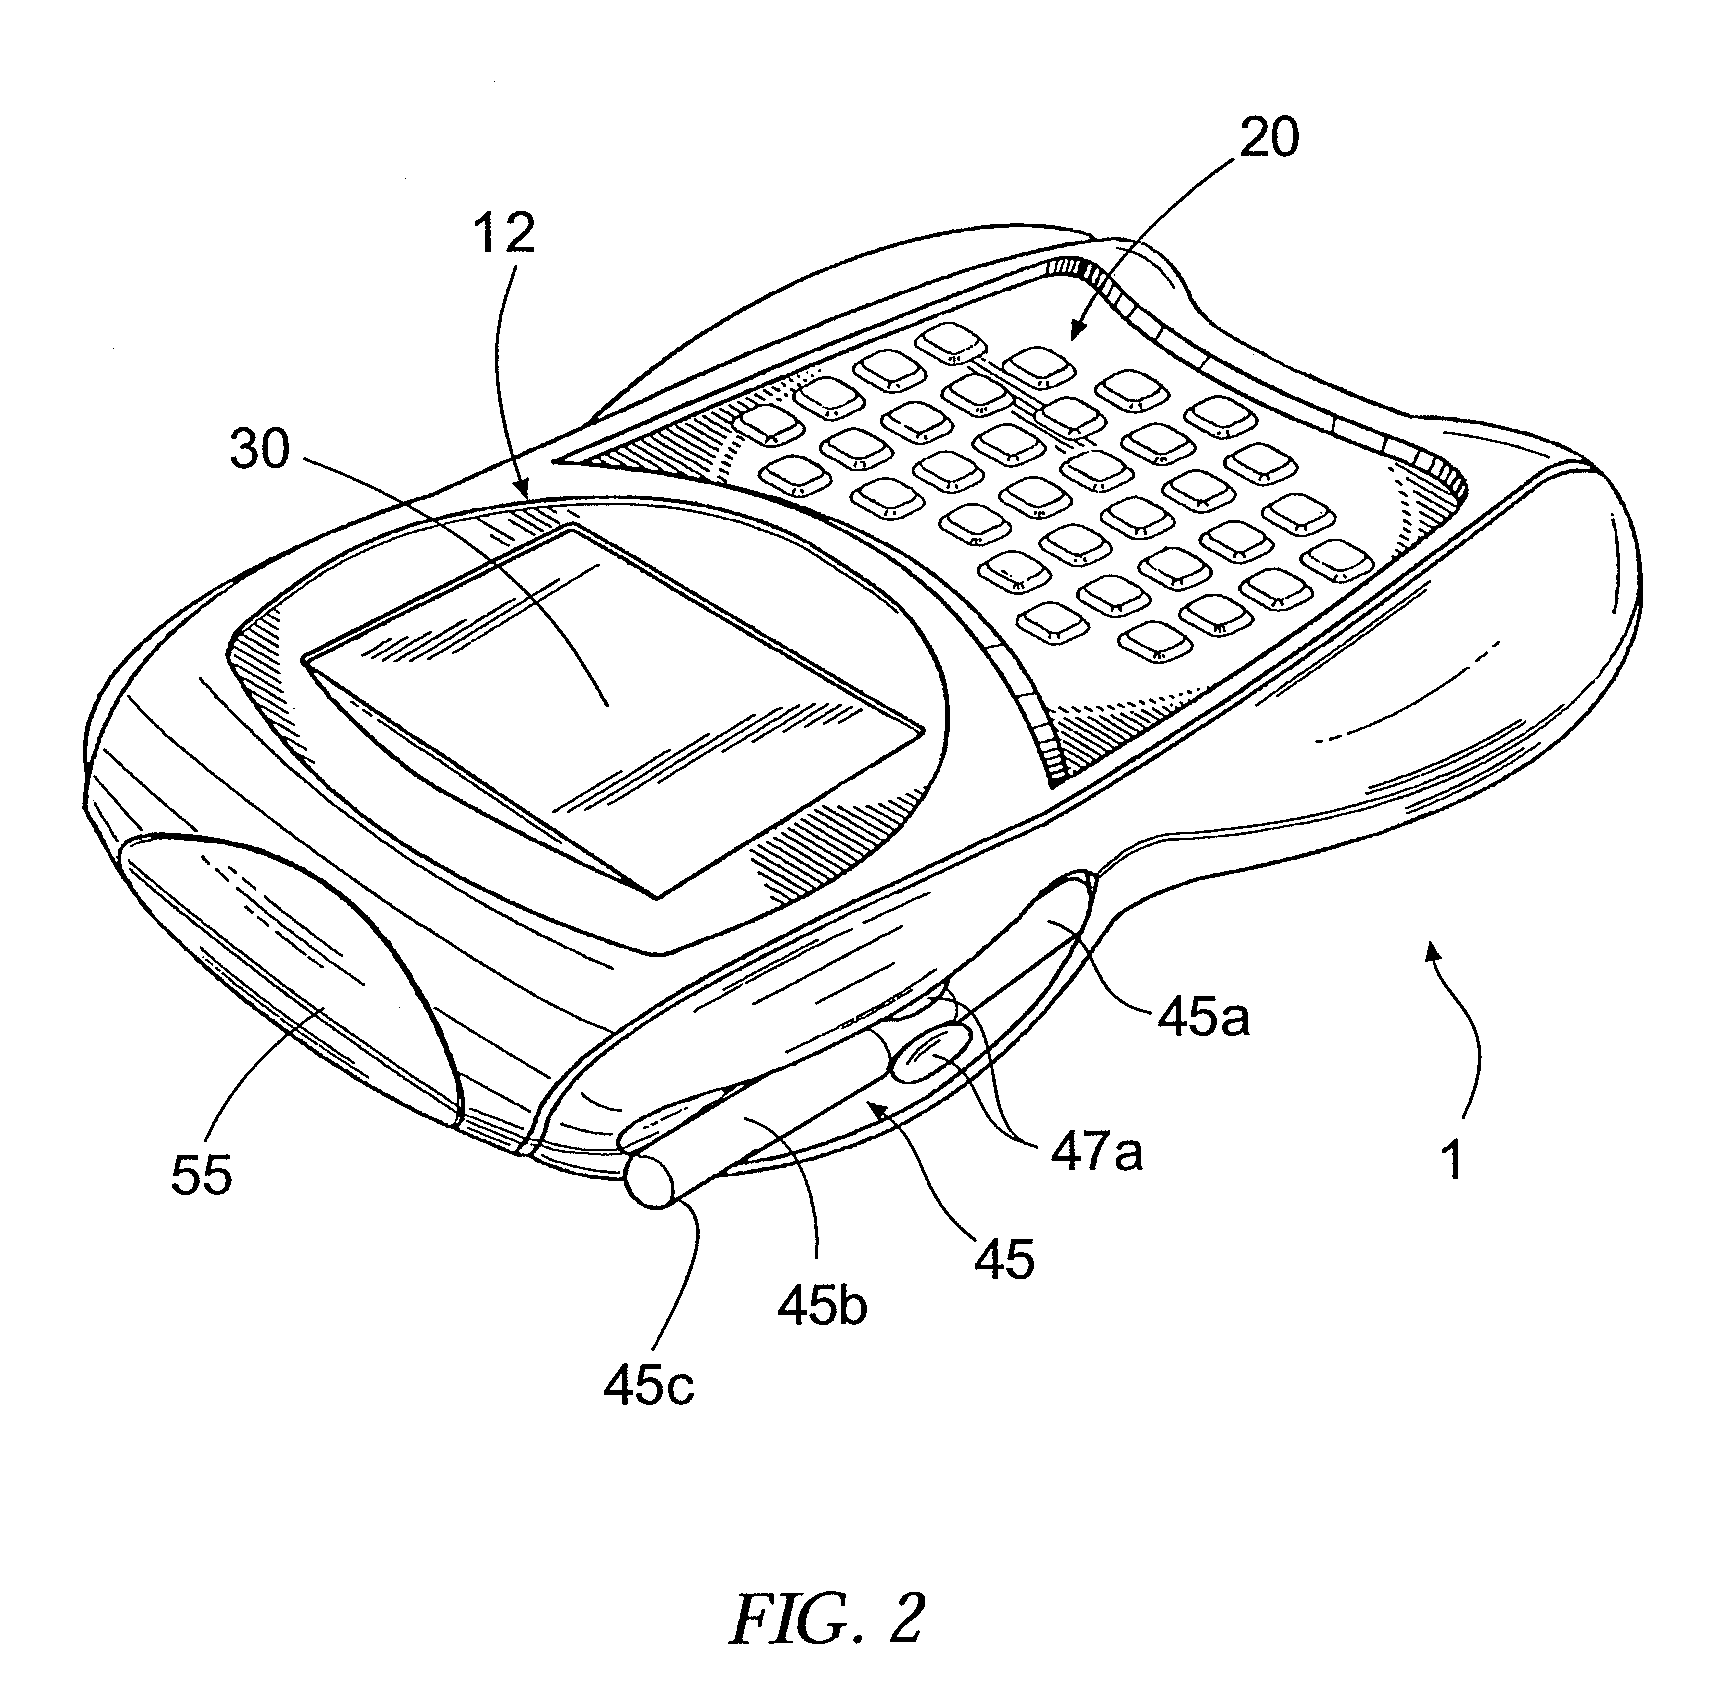 Portable data acquisition and management system and associated device and method